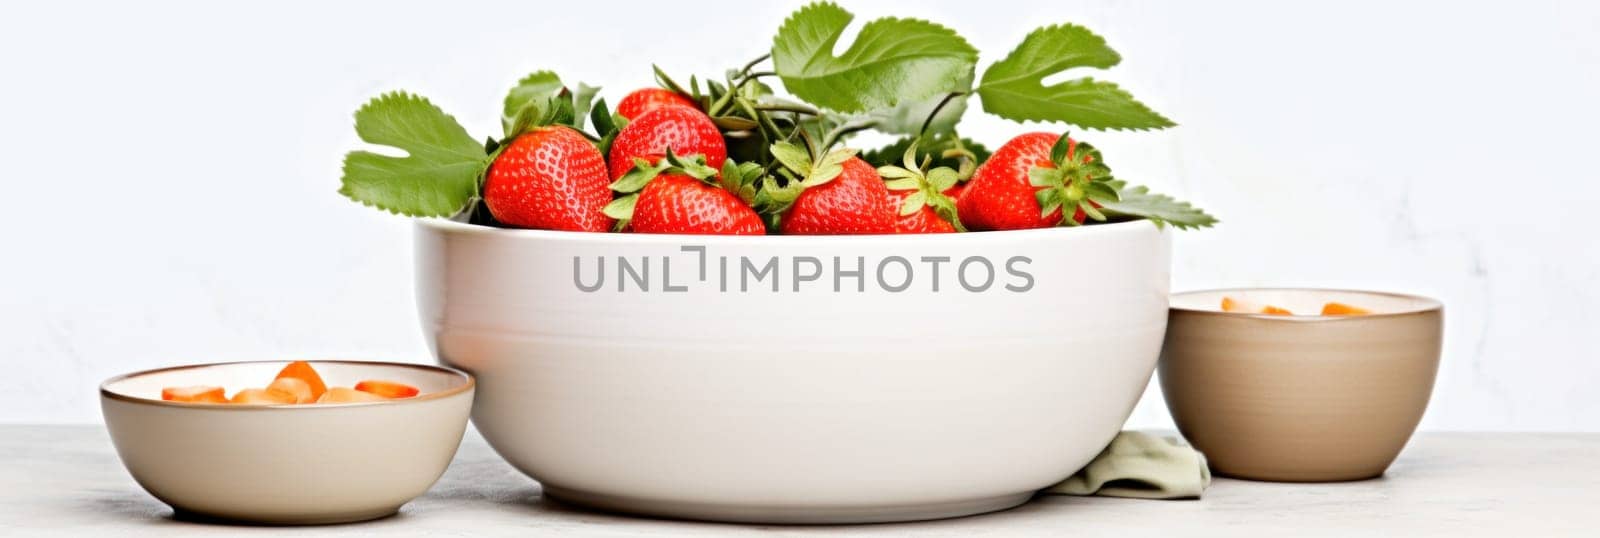 A bowl of strawberries and two cups of coffee, AI by starush